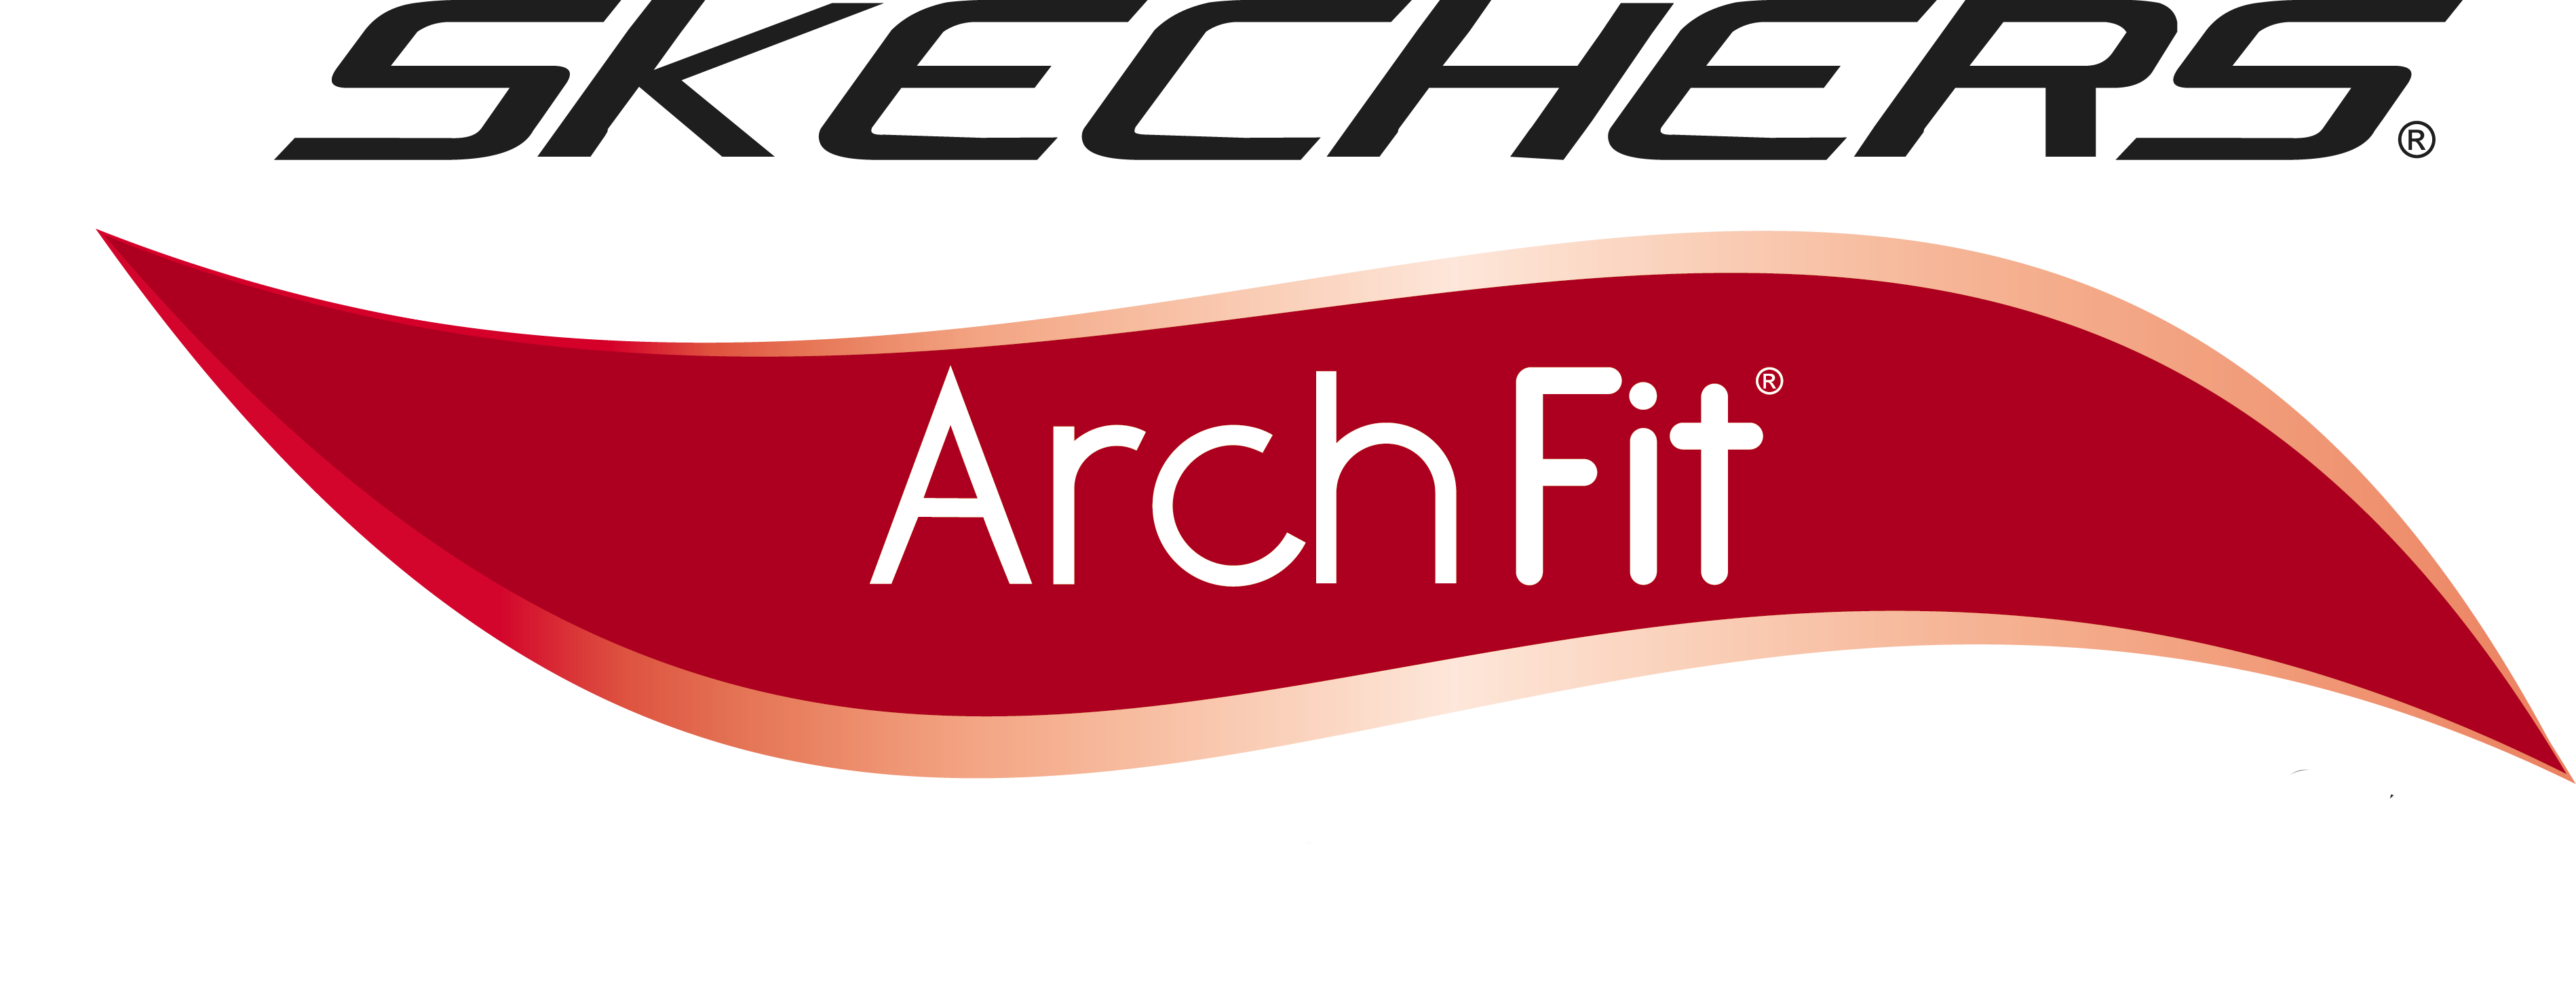 Arch Fit | SKECHERS BE